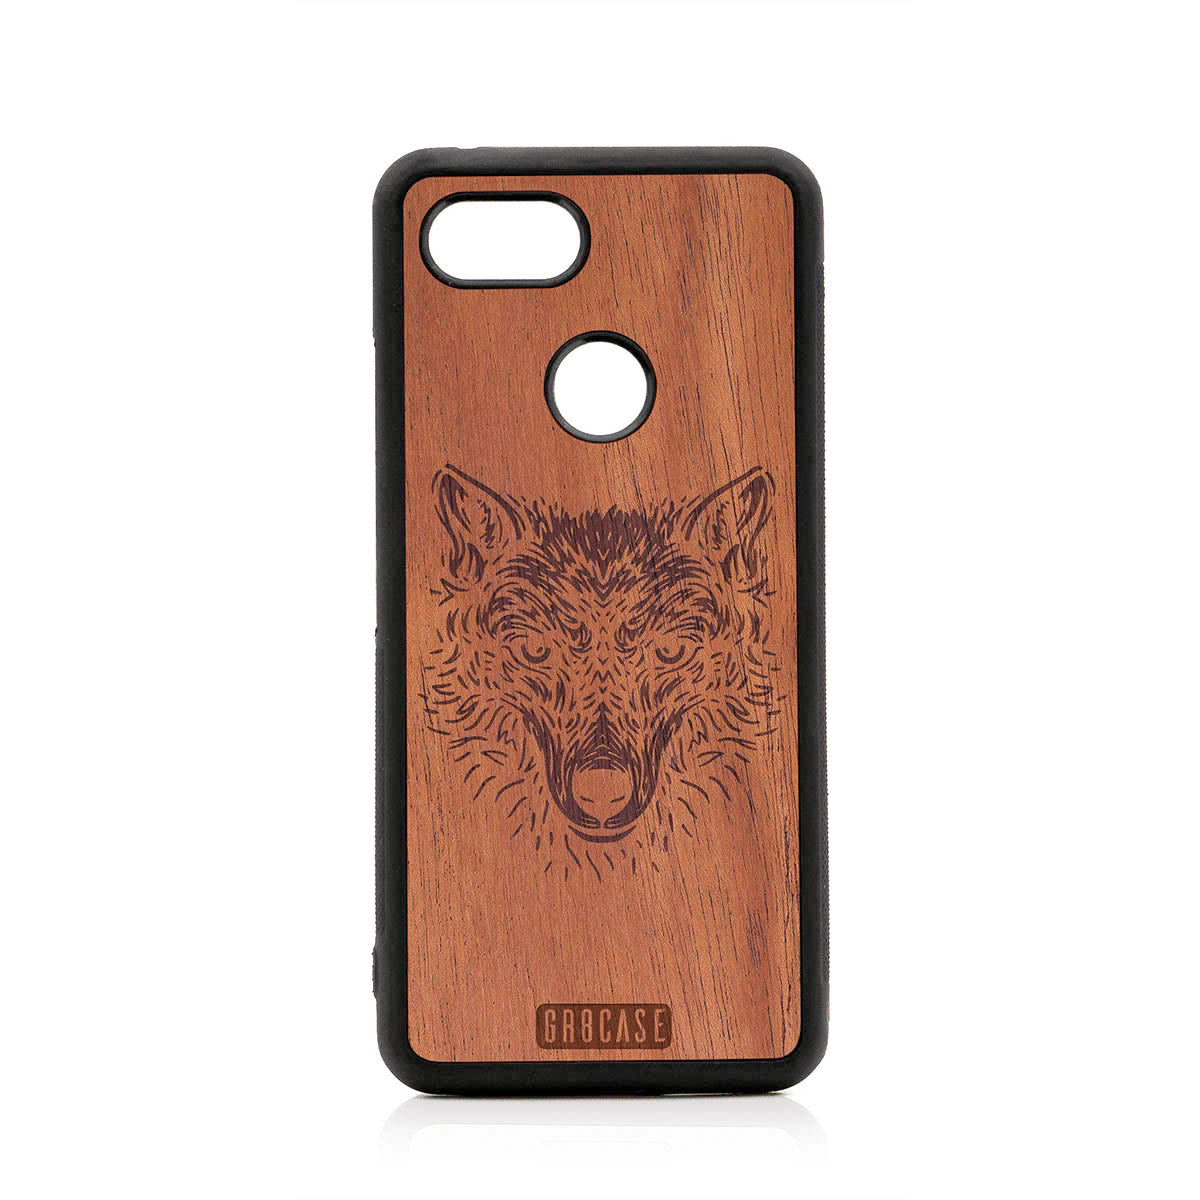 Furry Wolf Design Wood Case For Google Pixel 3